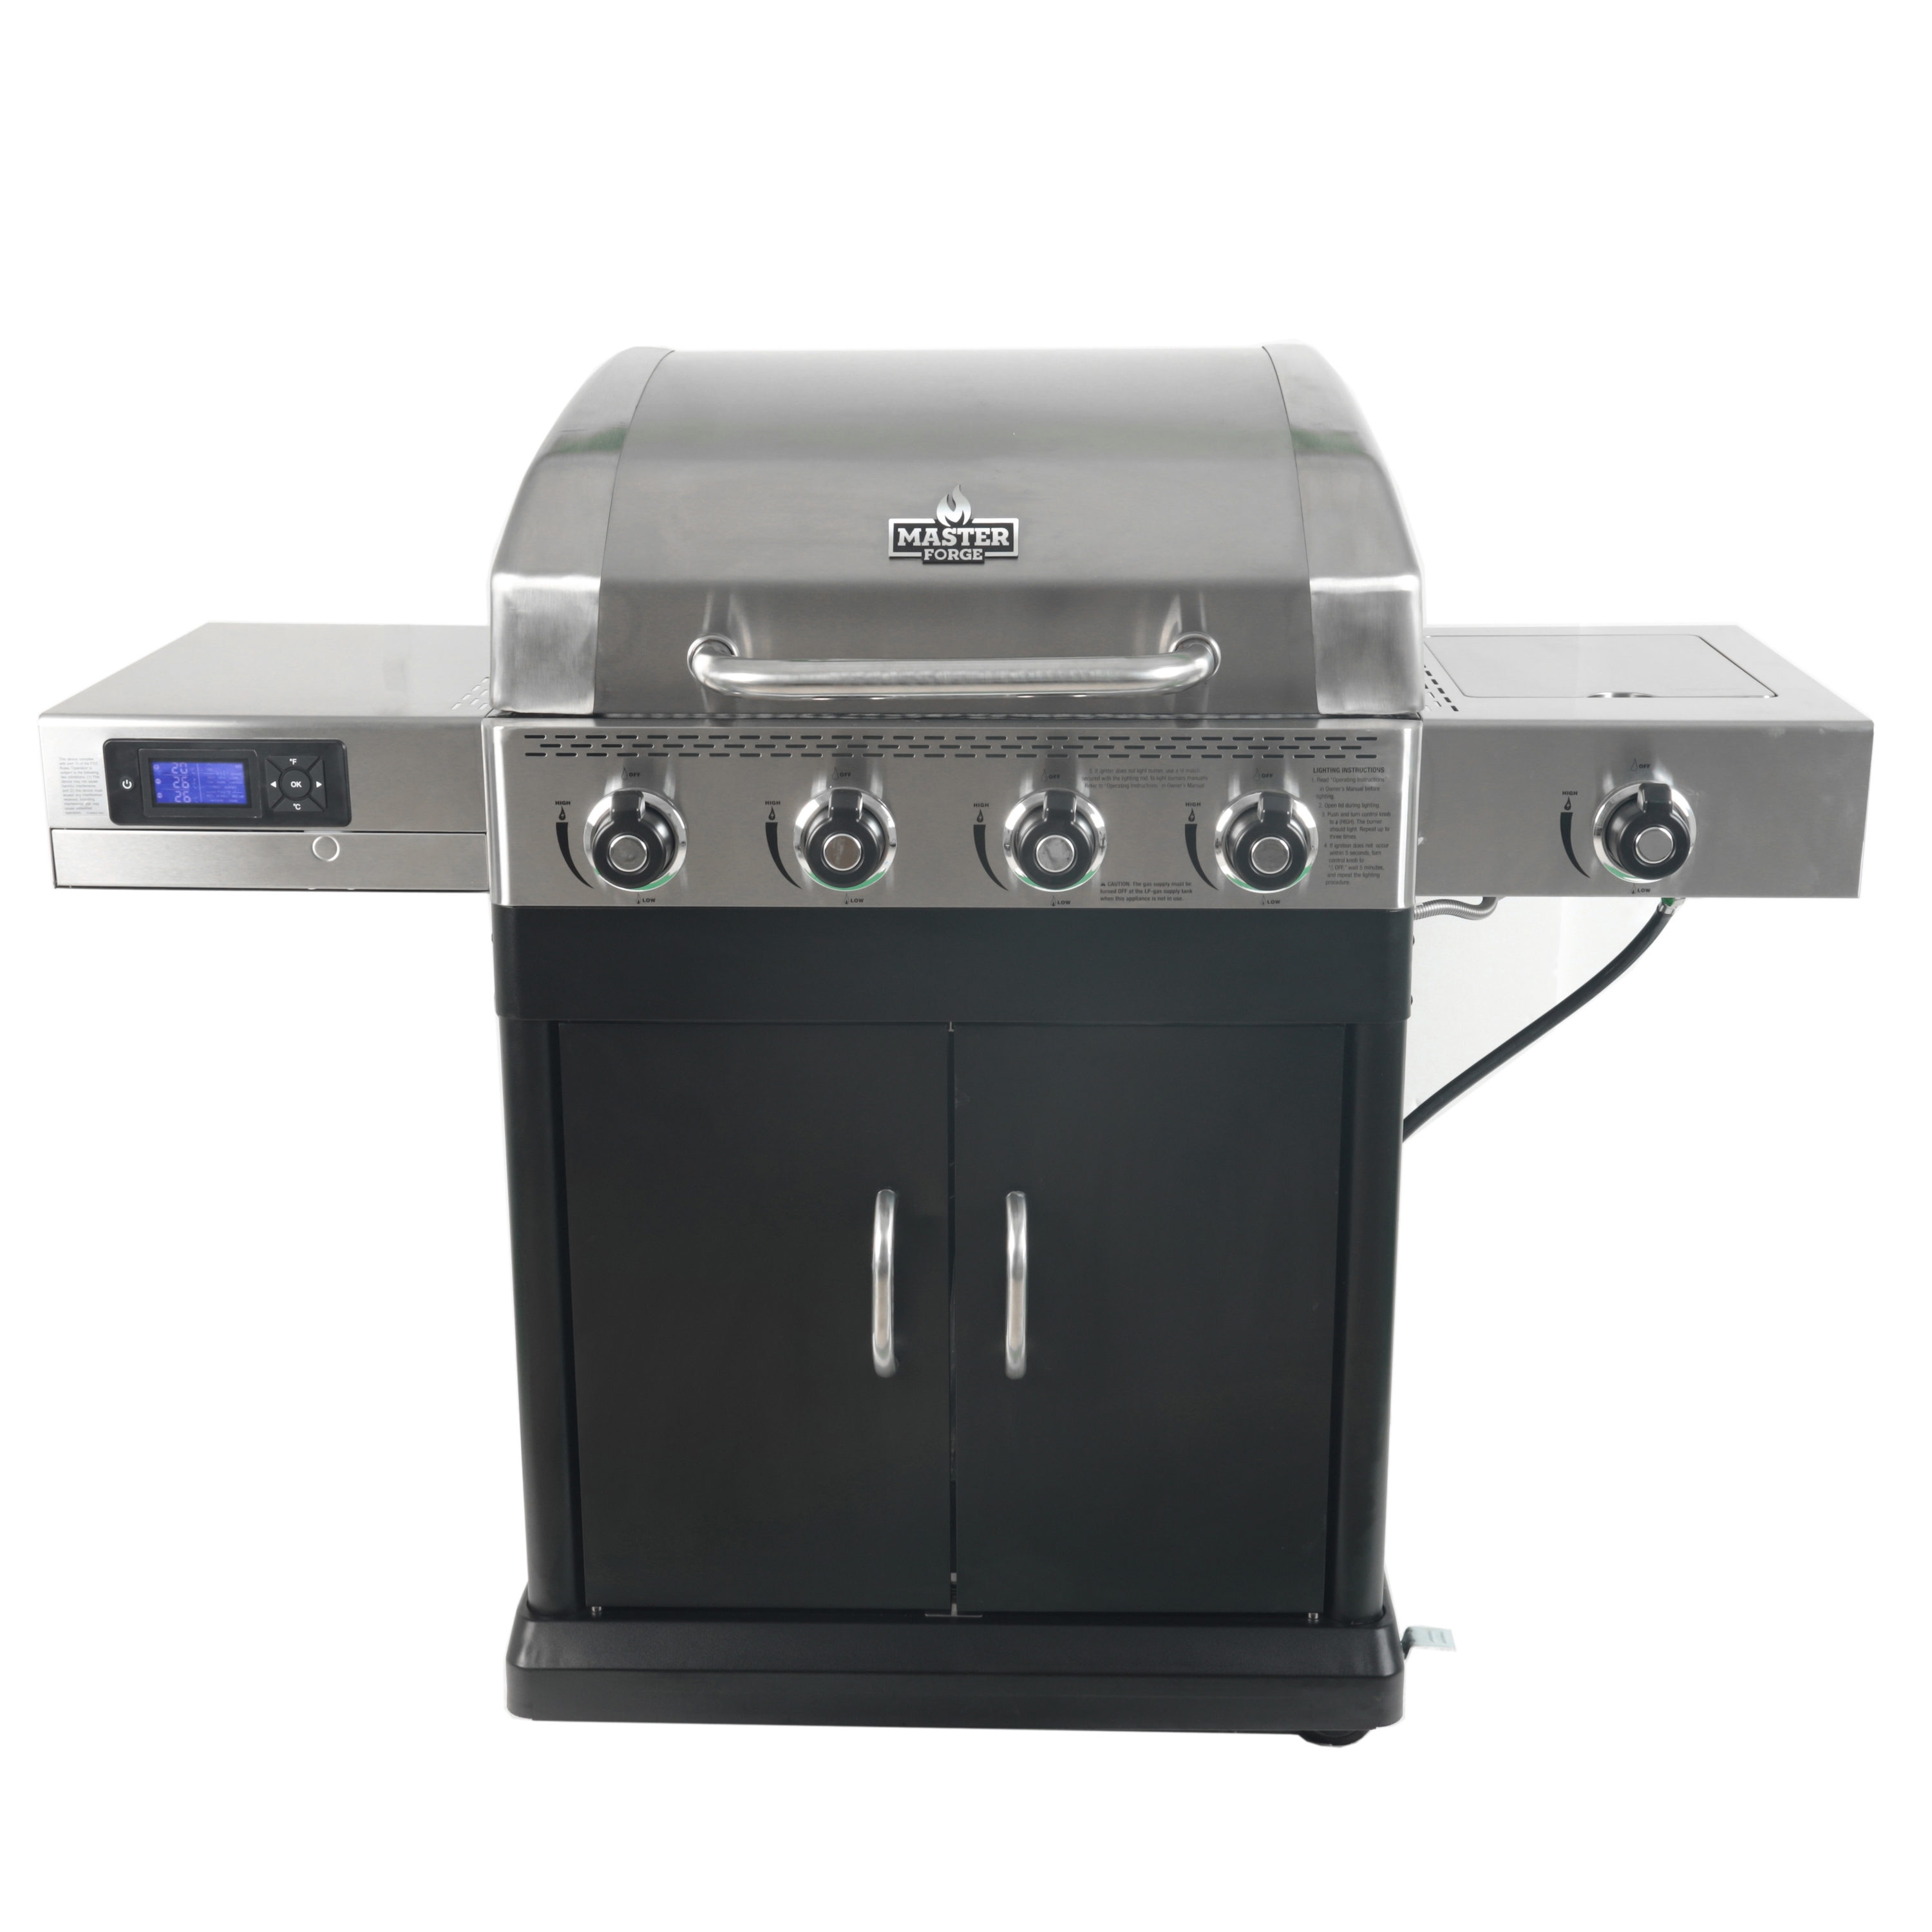 Master Forge Silver and Black/Stainless Steel and Powder Coated 4-Burner Liquid Propane Grill with 1 Side Burner in the Gas Grills department at Lowes.com